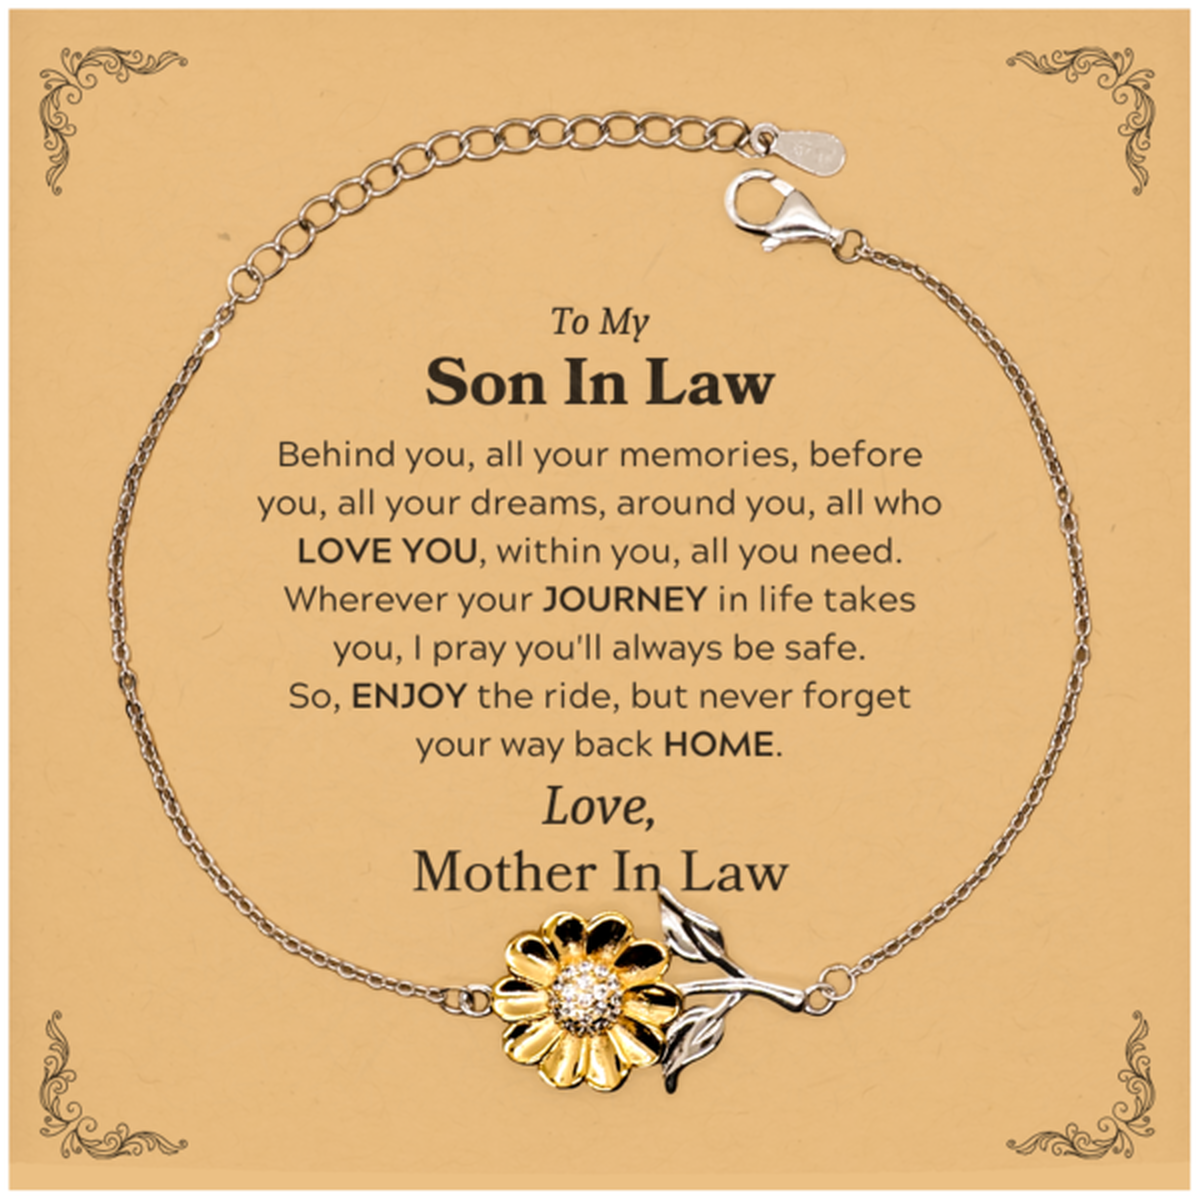 To My Son In Law Graduation Gifts from Mother In Law, Son In Law Sunflower Bracelet Christmas Birthday Gifts for Son In Law Behind you, all your memories, before you, all your dreams. Love, Mother In Law